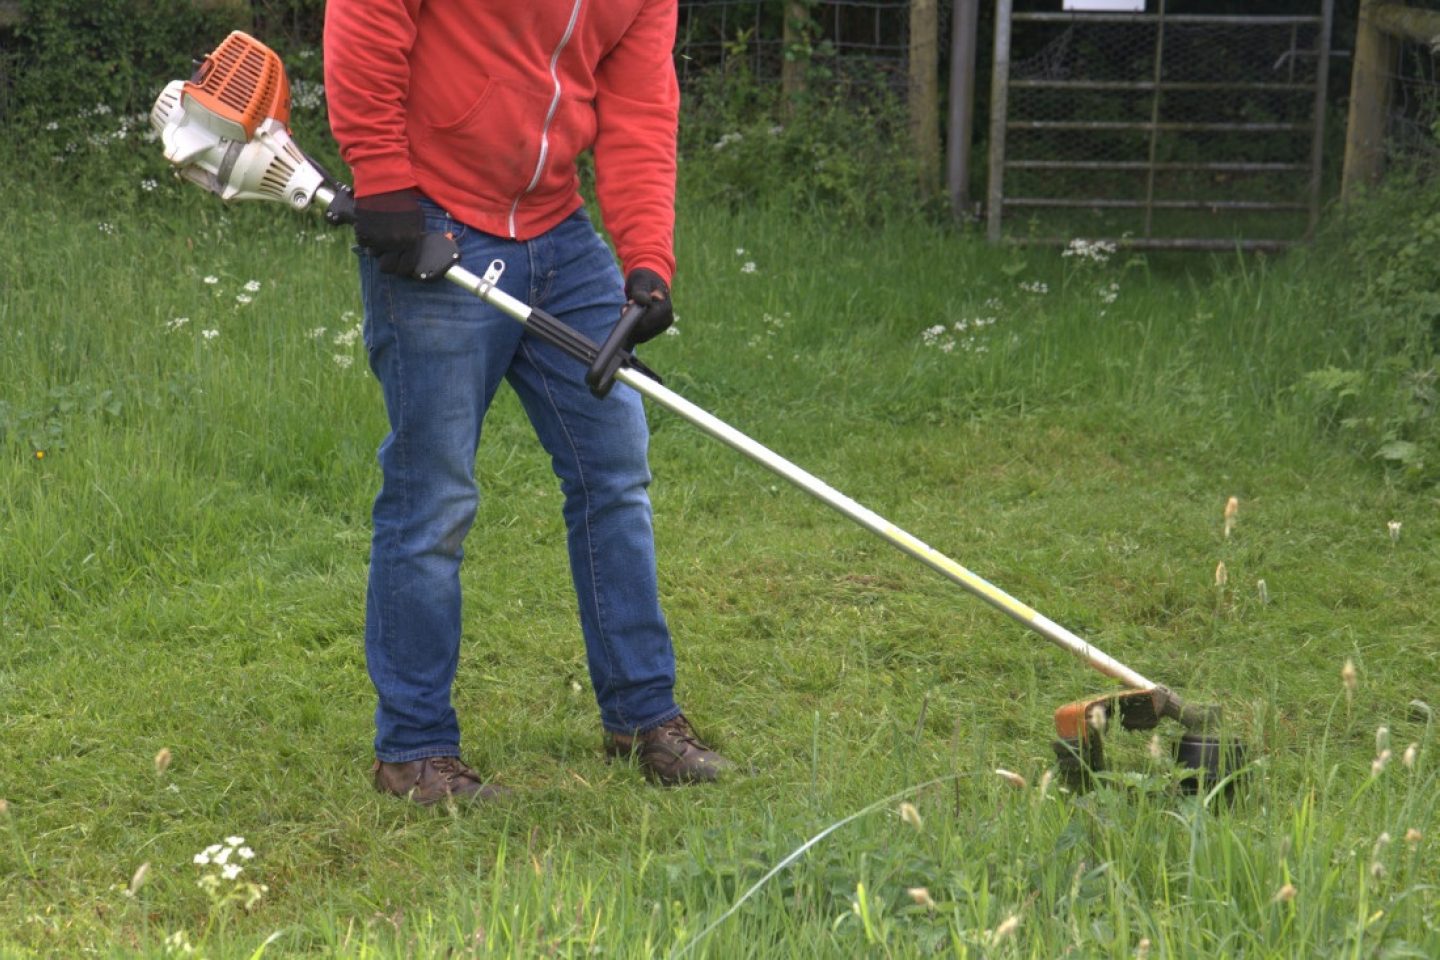 A grass strimmer is used to cut the grass